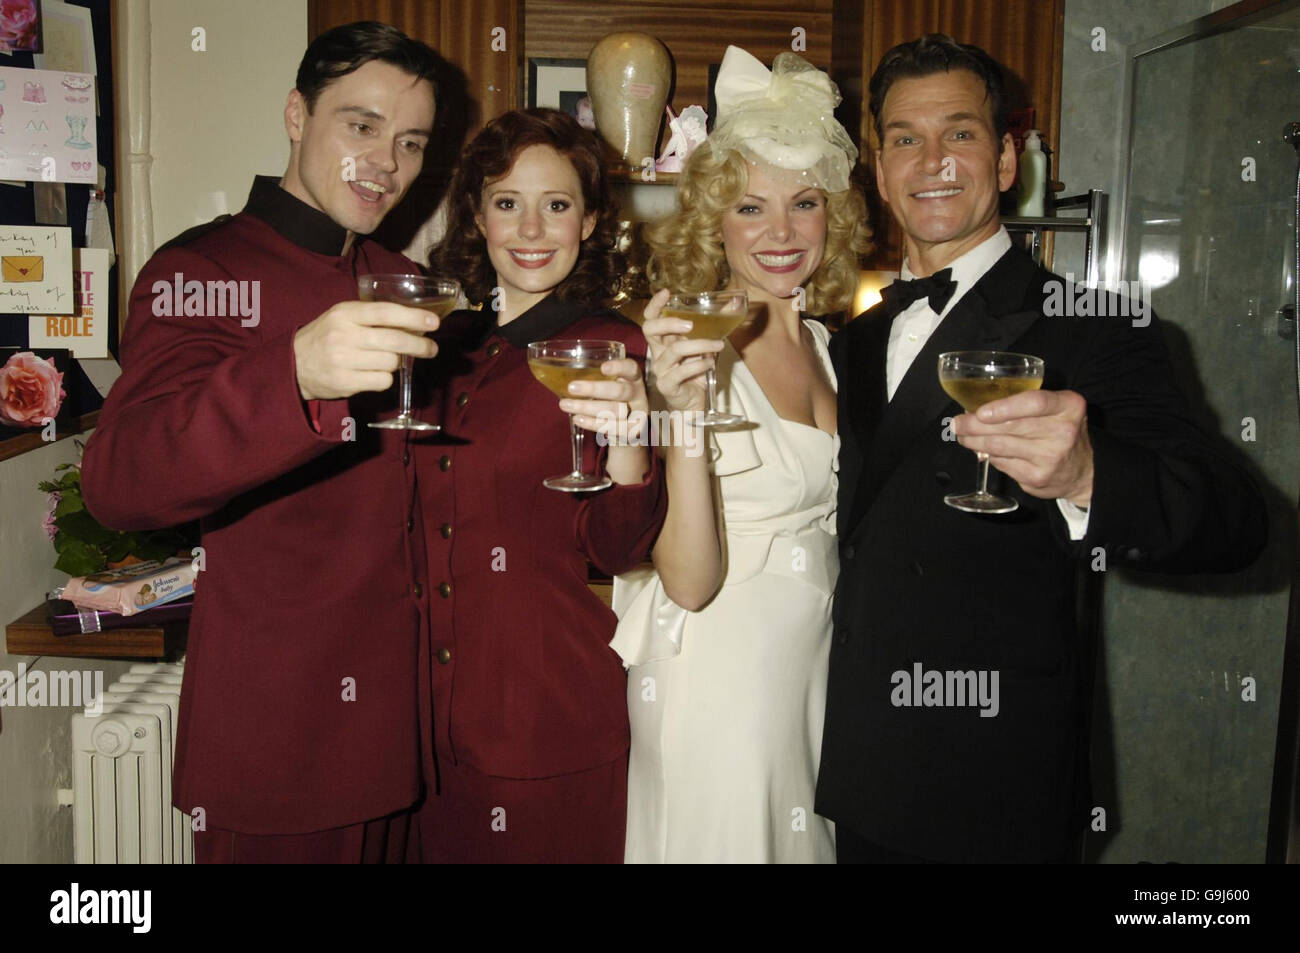 New additions to the cast of Guys and Dolls, from left: Norman Dowman, Amy Nuttall and Samantha Janus pose with lead actor Patrick Swayze after their first night's performance at the Piccadilly Theatre, central London. Stock Photo